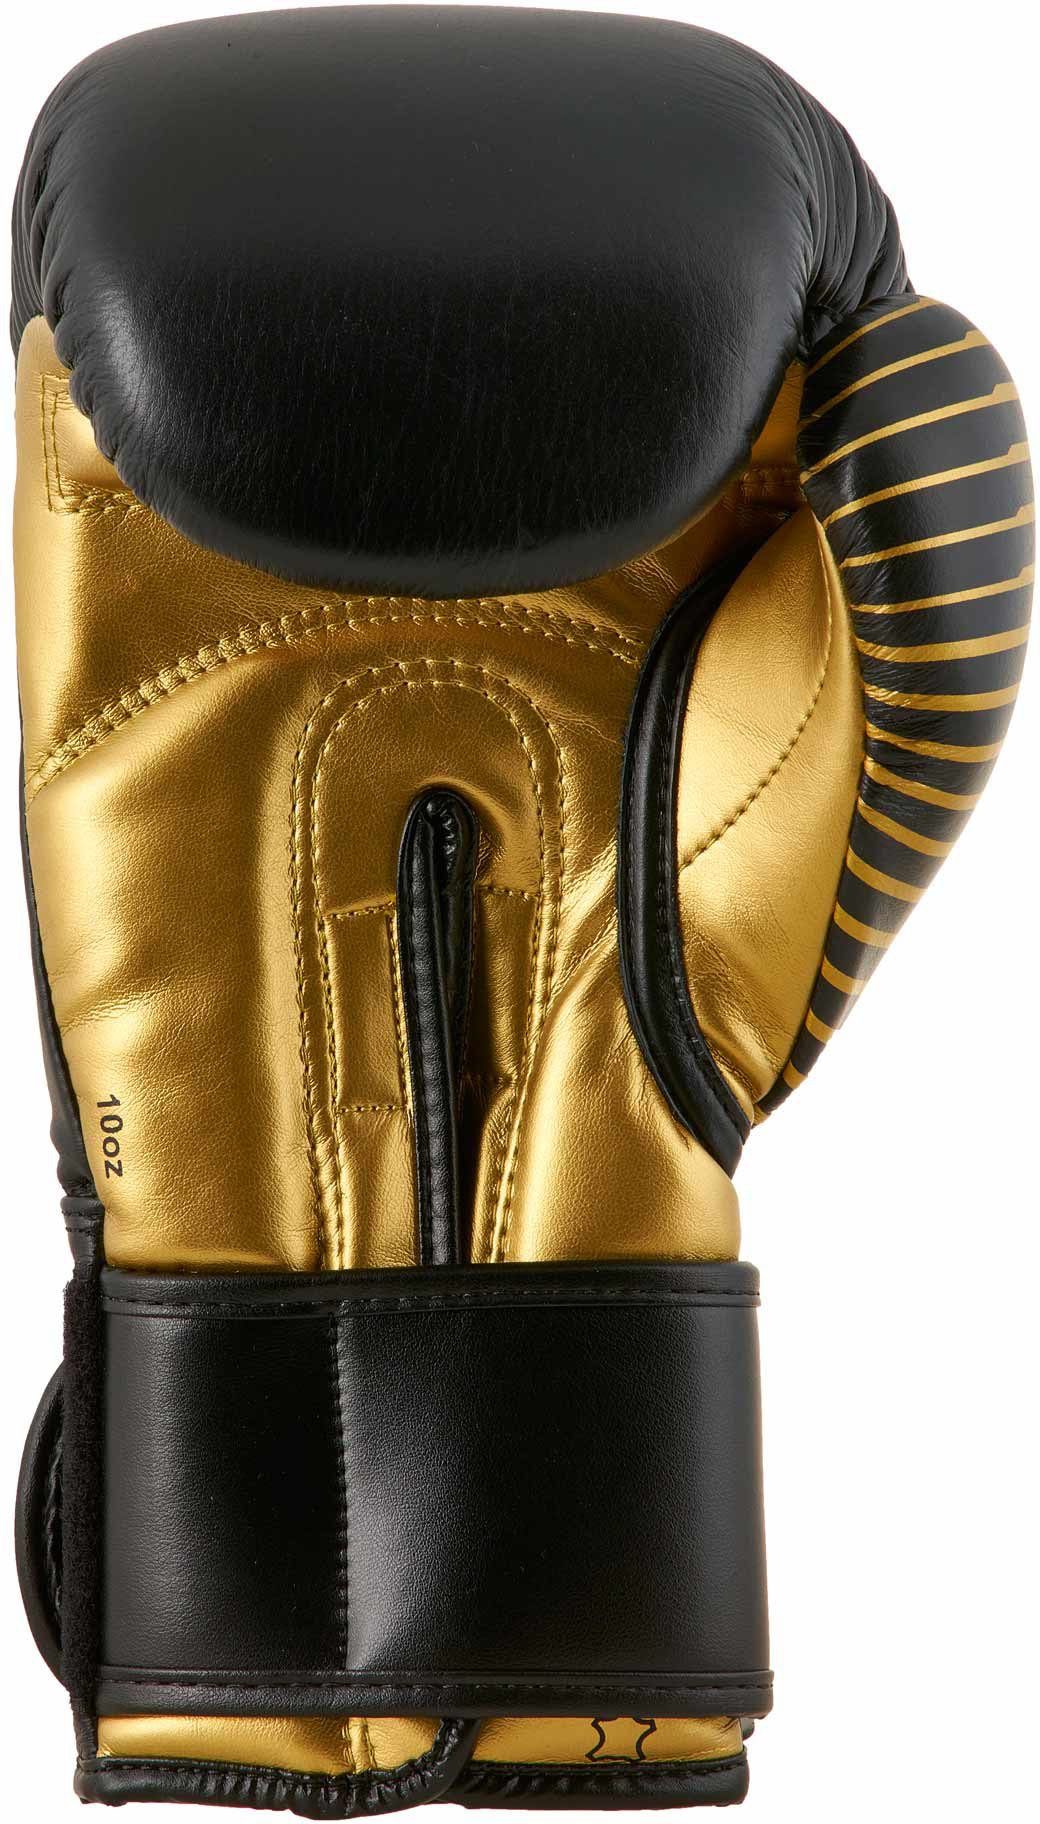 Handschuh Performance black/gold Boxhandschuhe adidas Competition